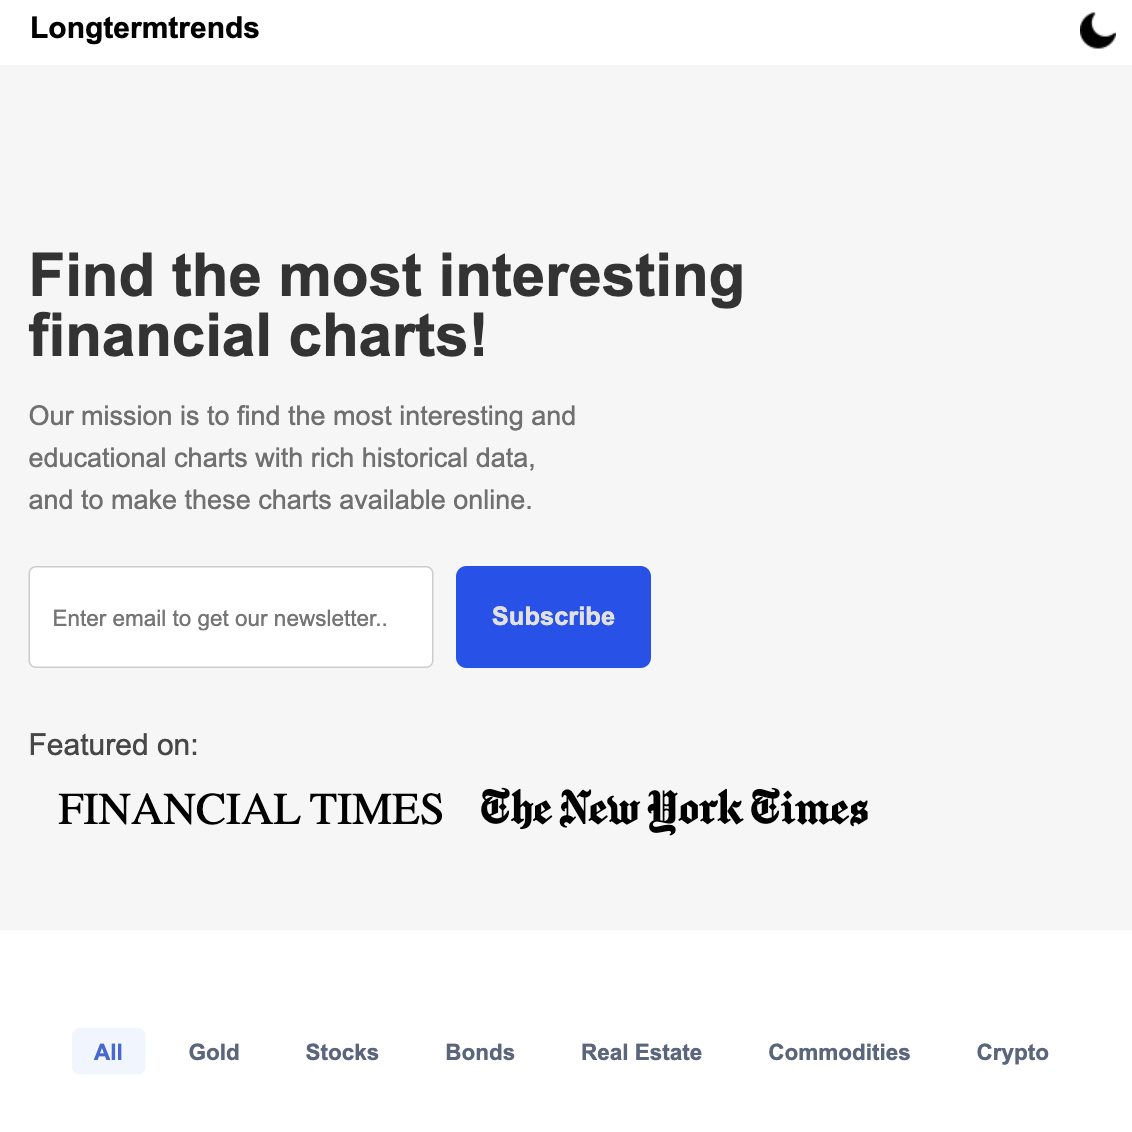 Thumbnail of Longtermtrends | Find the most interesting financial charts!